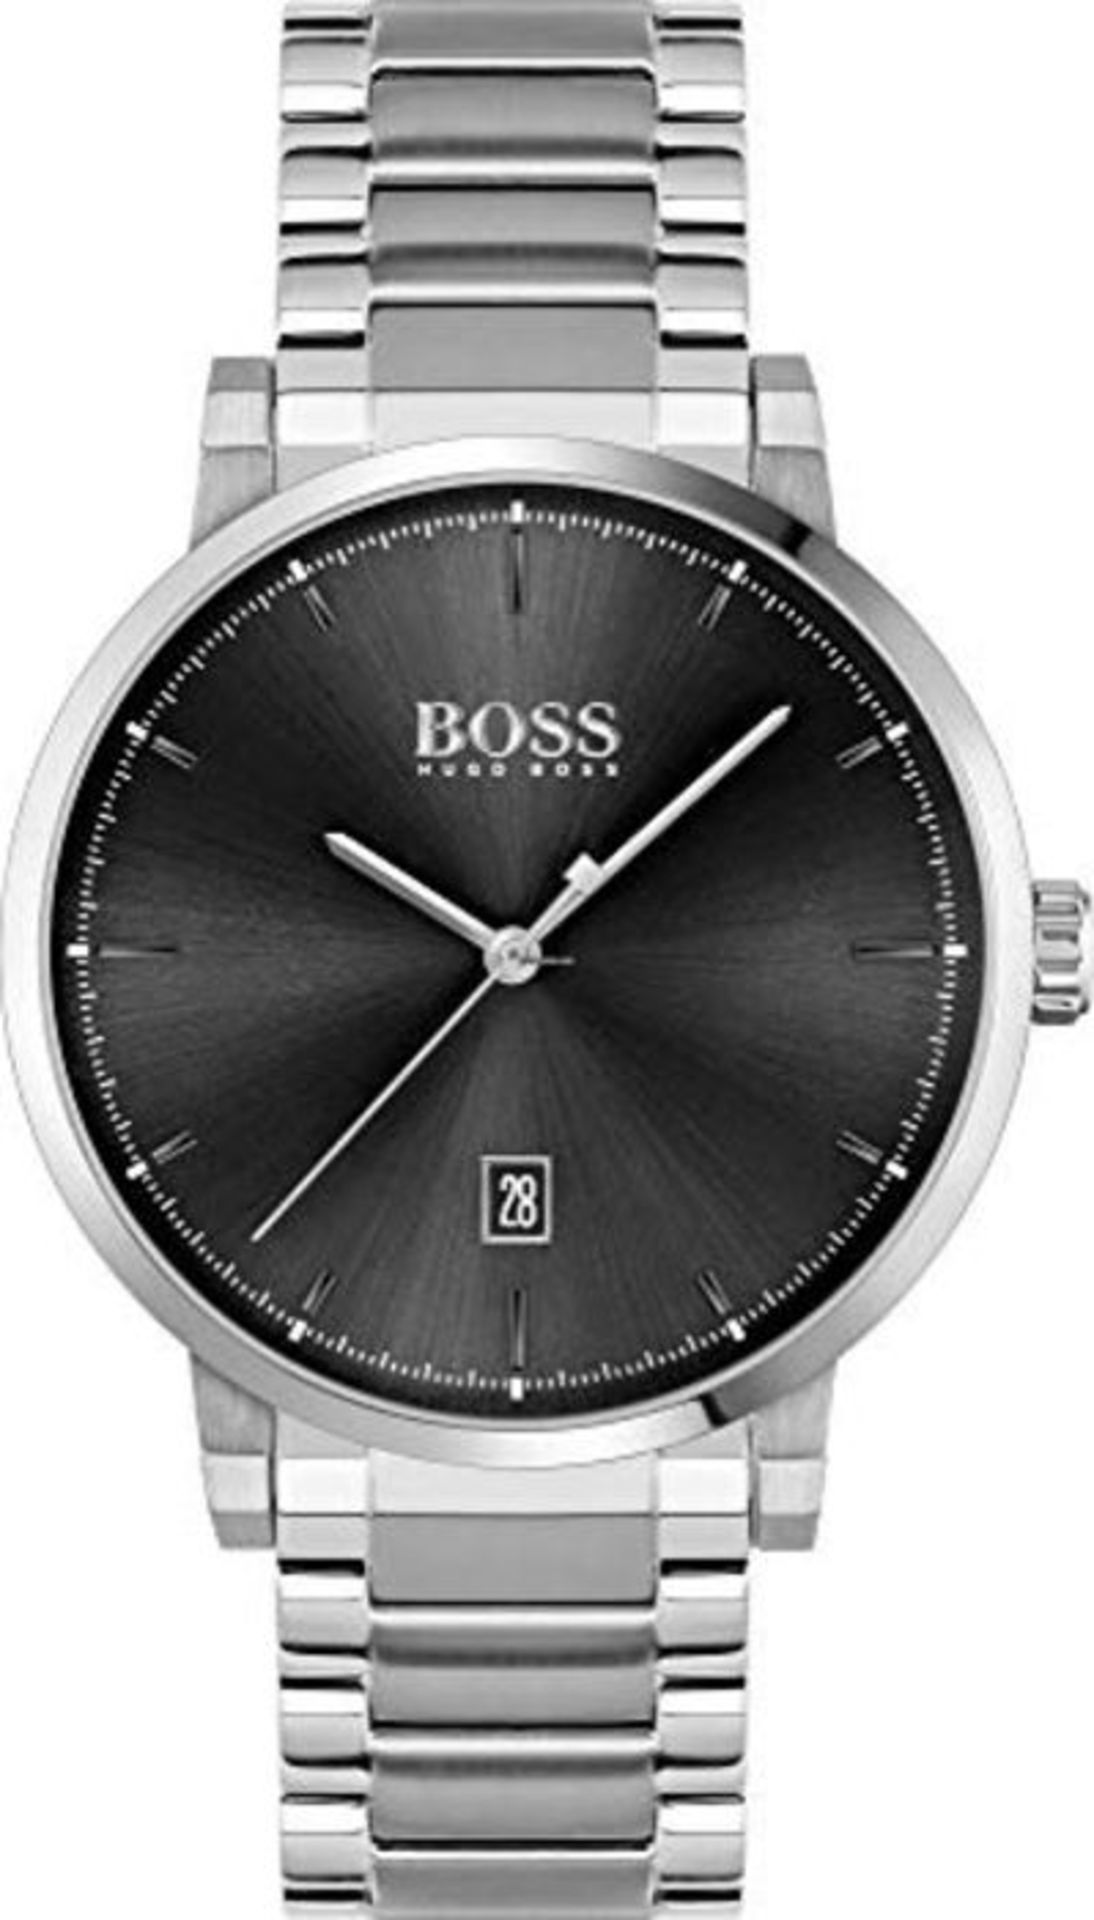 RRP £179.00 BOSS Men's Analogue Quartz Watch with Stainless Steel Strap 1513792, Black, Black